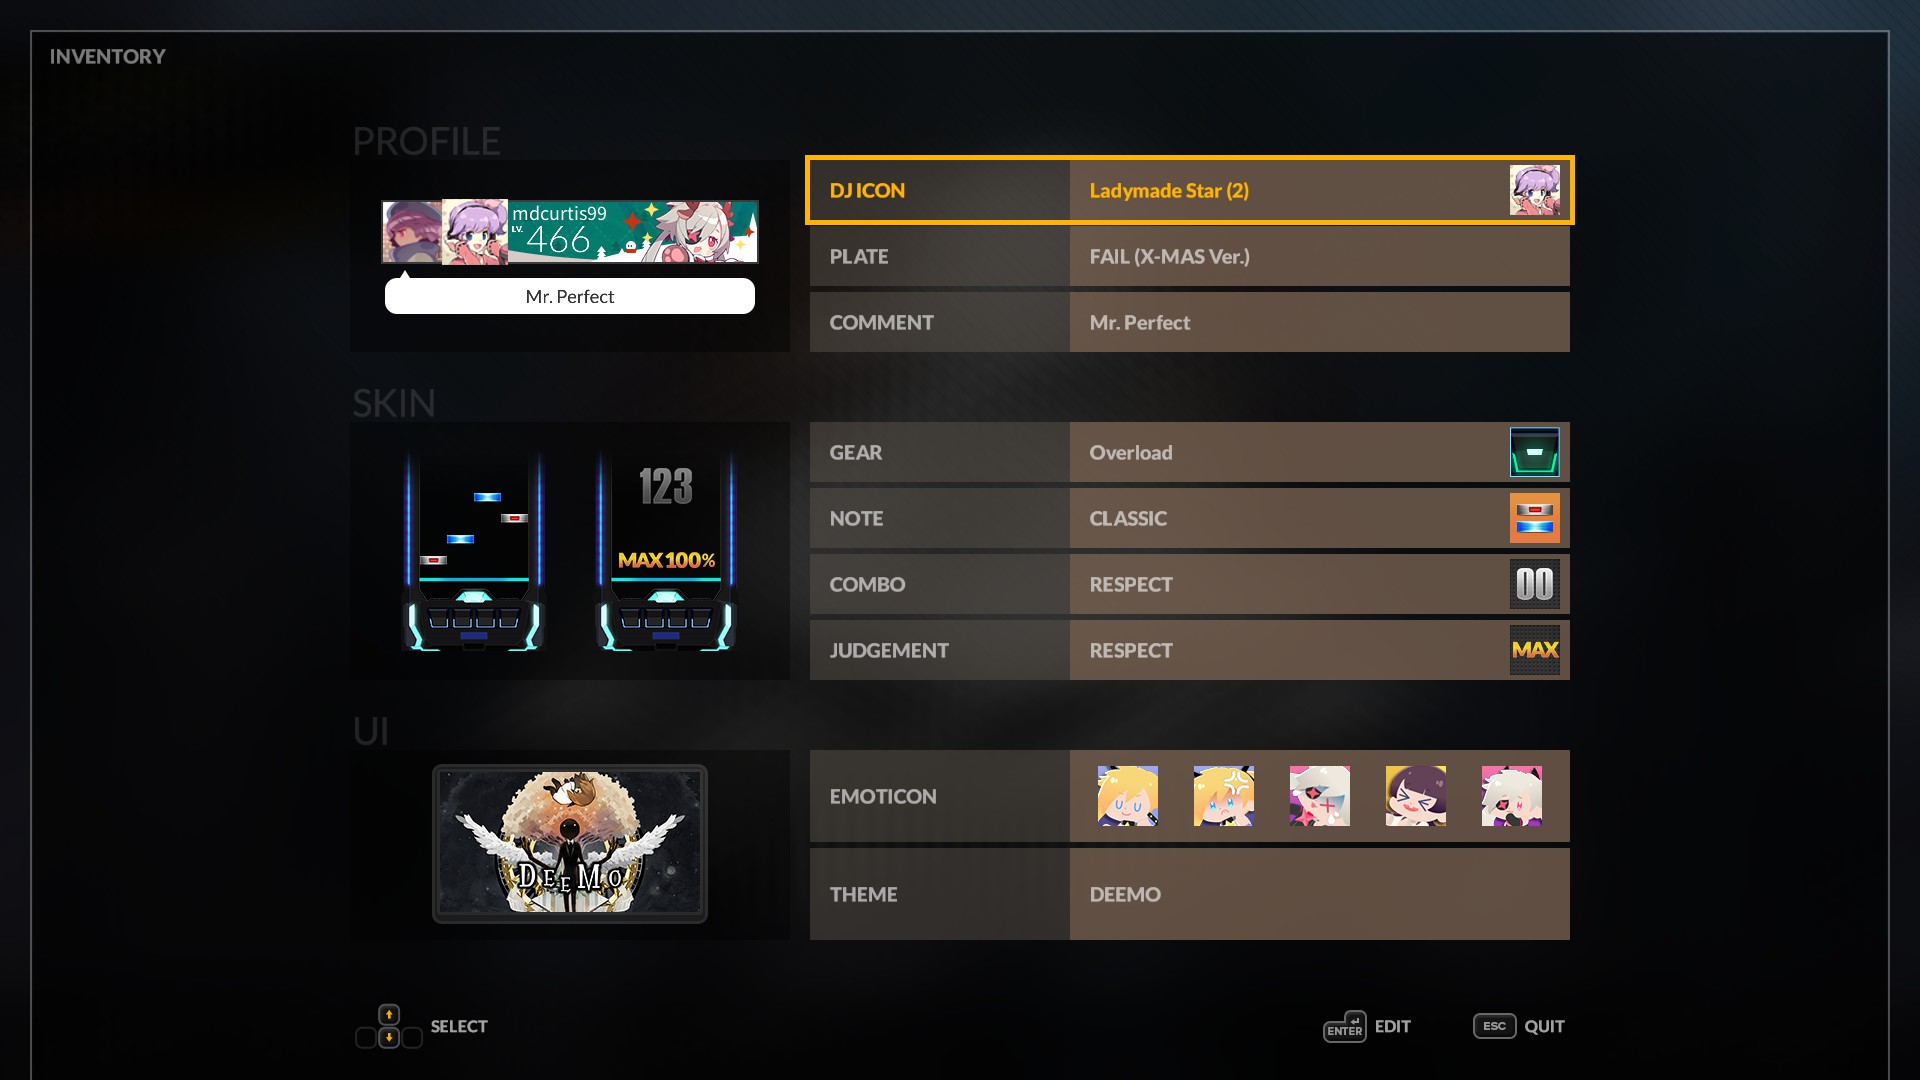 DJMAX RESPECT V - Full Walkthough + All Achievements Guide Complete - Settings and Inventory - 2D3C1D2